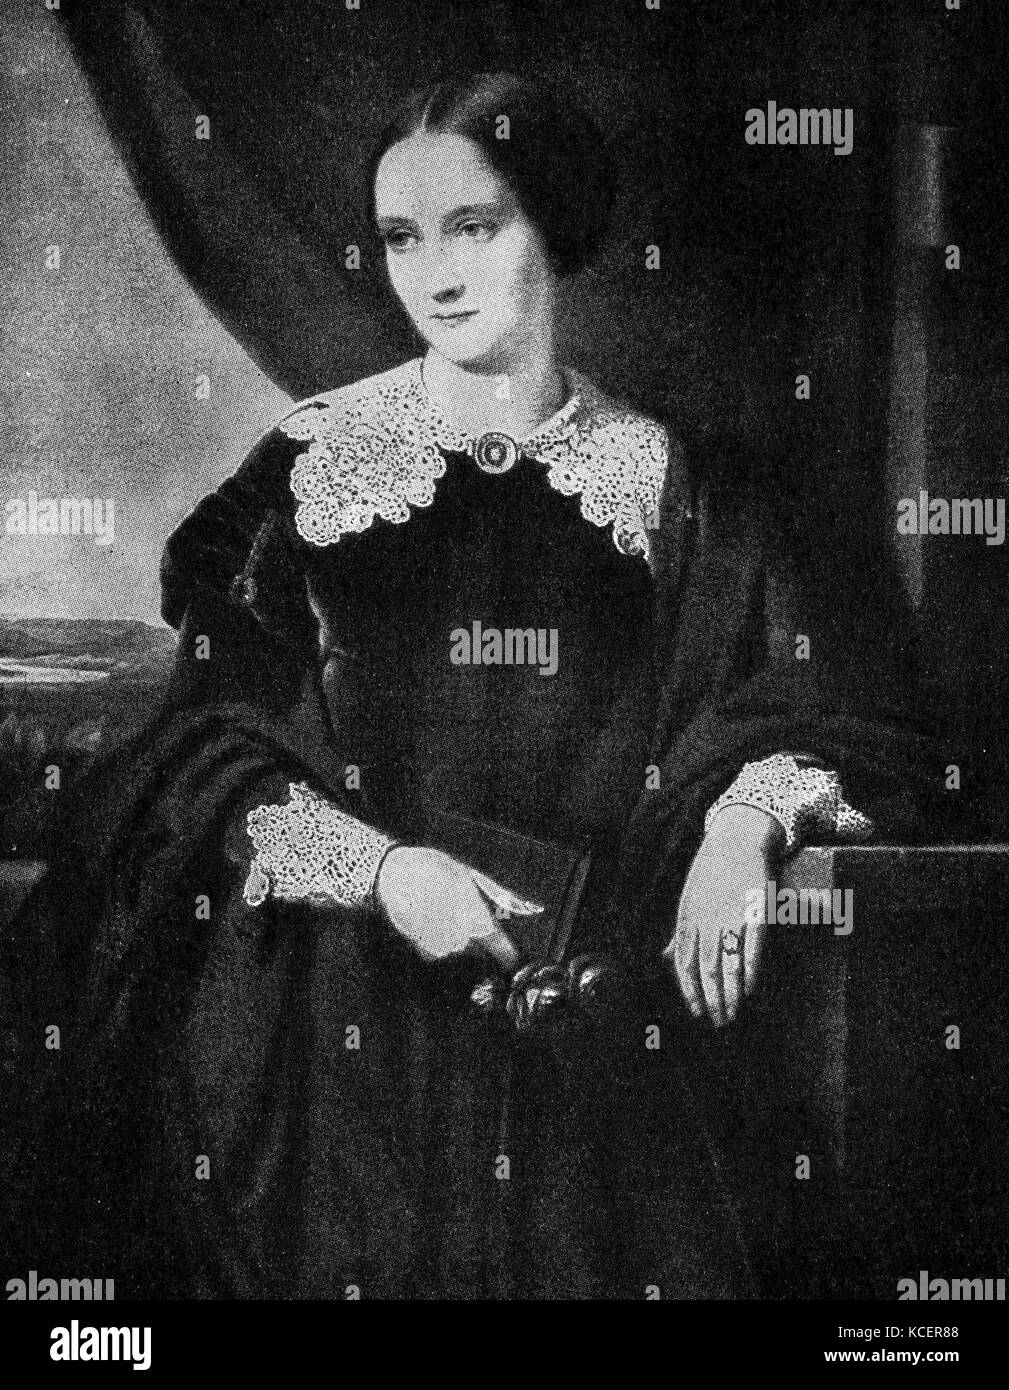 Portrait of Mathilde Wesendonck (1828-1902) a German poet and author. Dated 19th Century Stock Photo